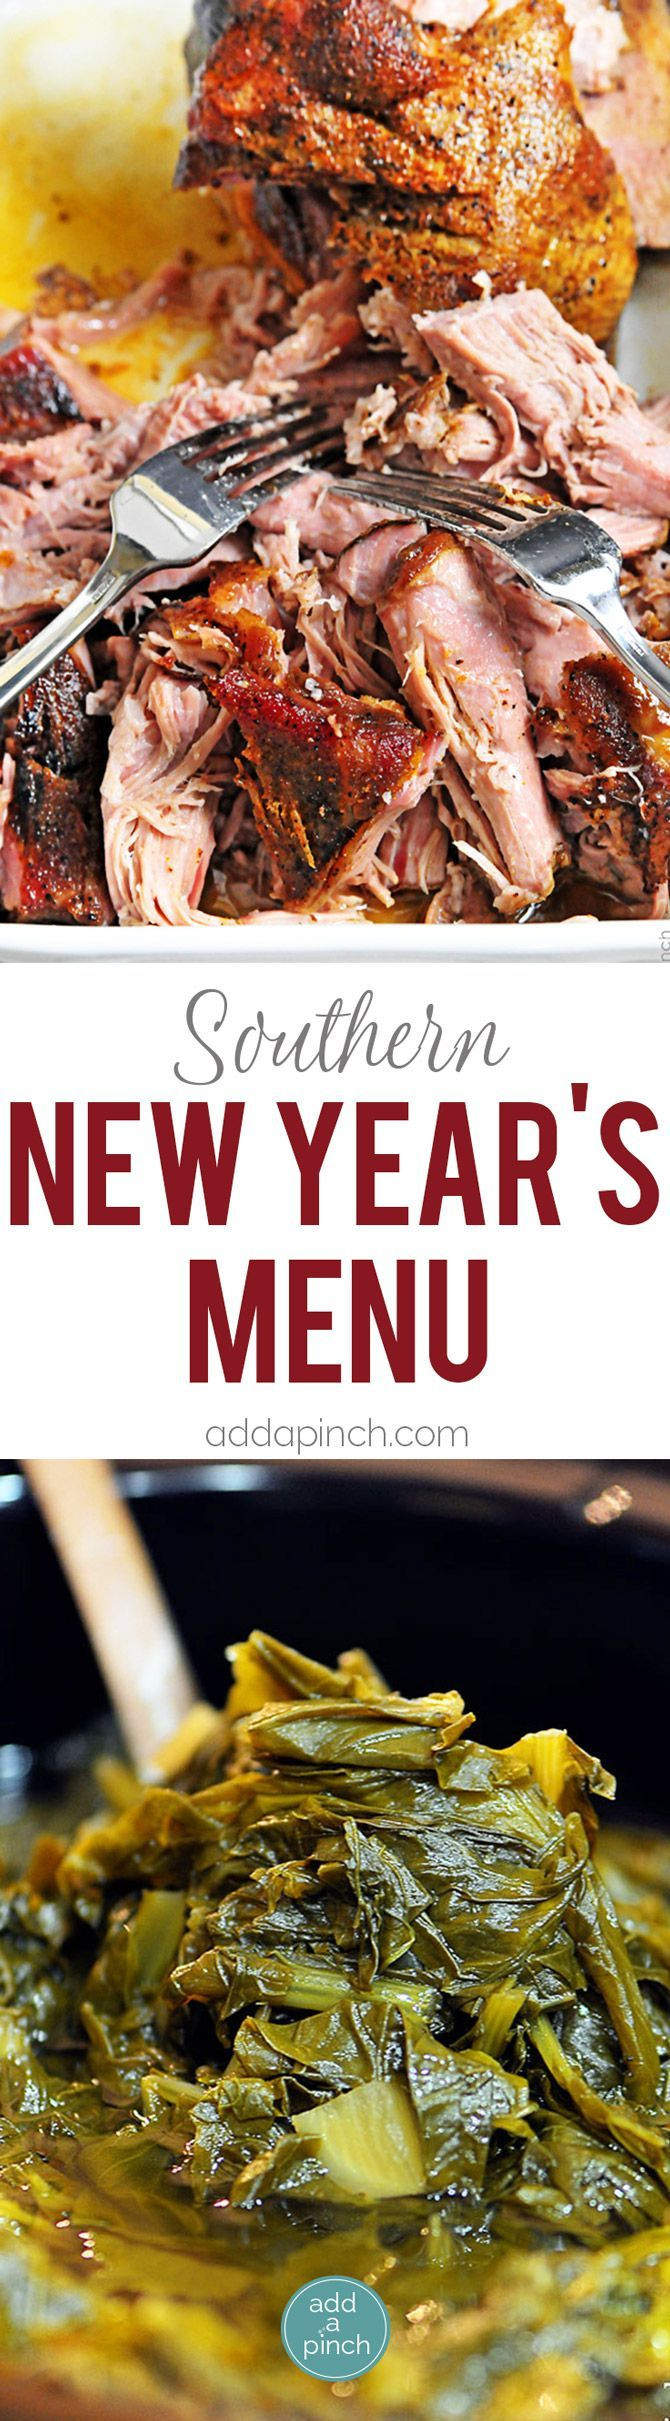 New Years Day Dinner Ideas
 Southern New Year s Menu